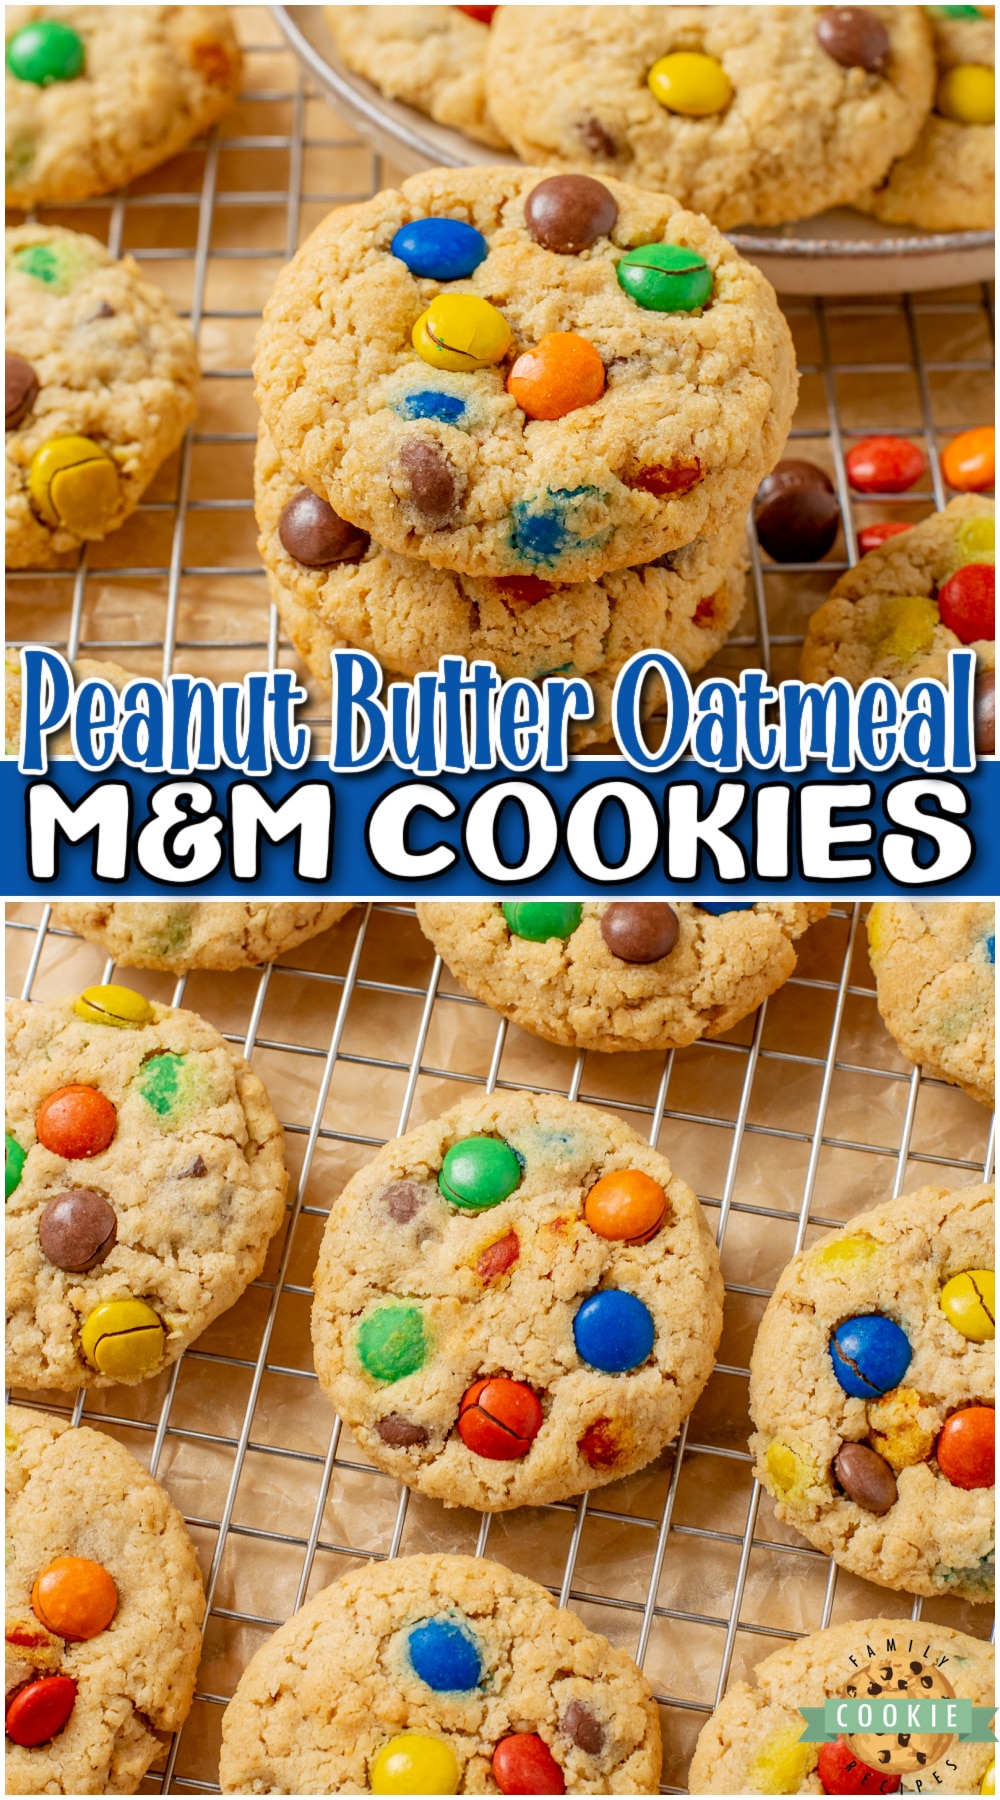 Peanut Butter Oatmeal M&M Cookies are soft & chewy cookies loaded with oats & M&M candies! Homemade oatmeal peanut butter cookies made with classic ingredients that everyone loves!